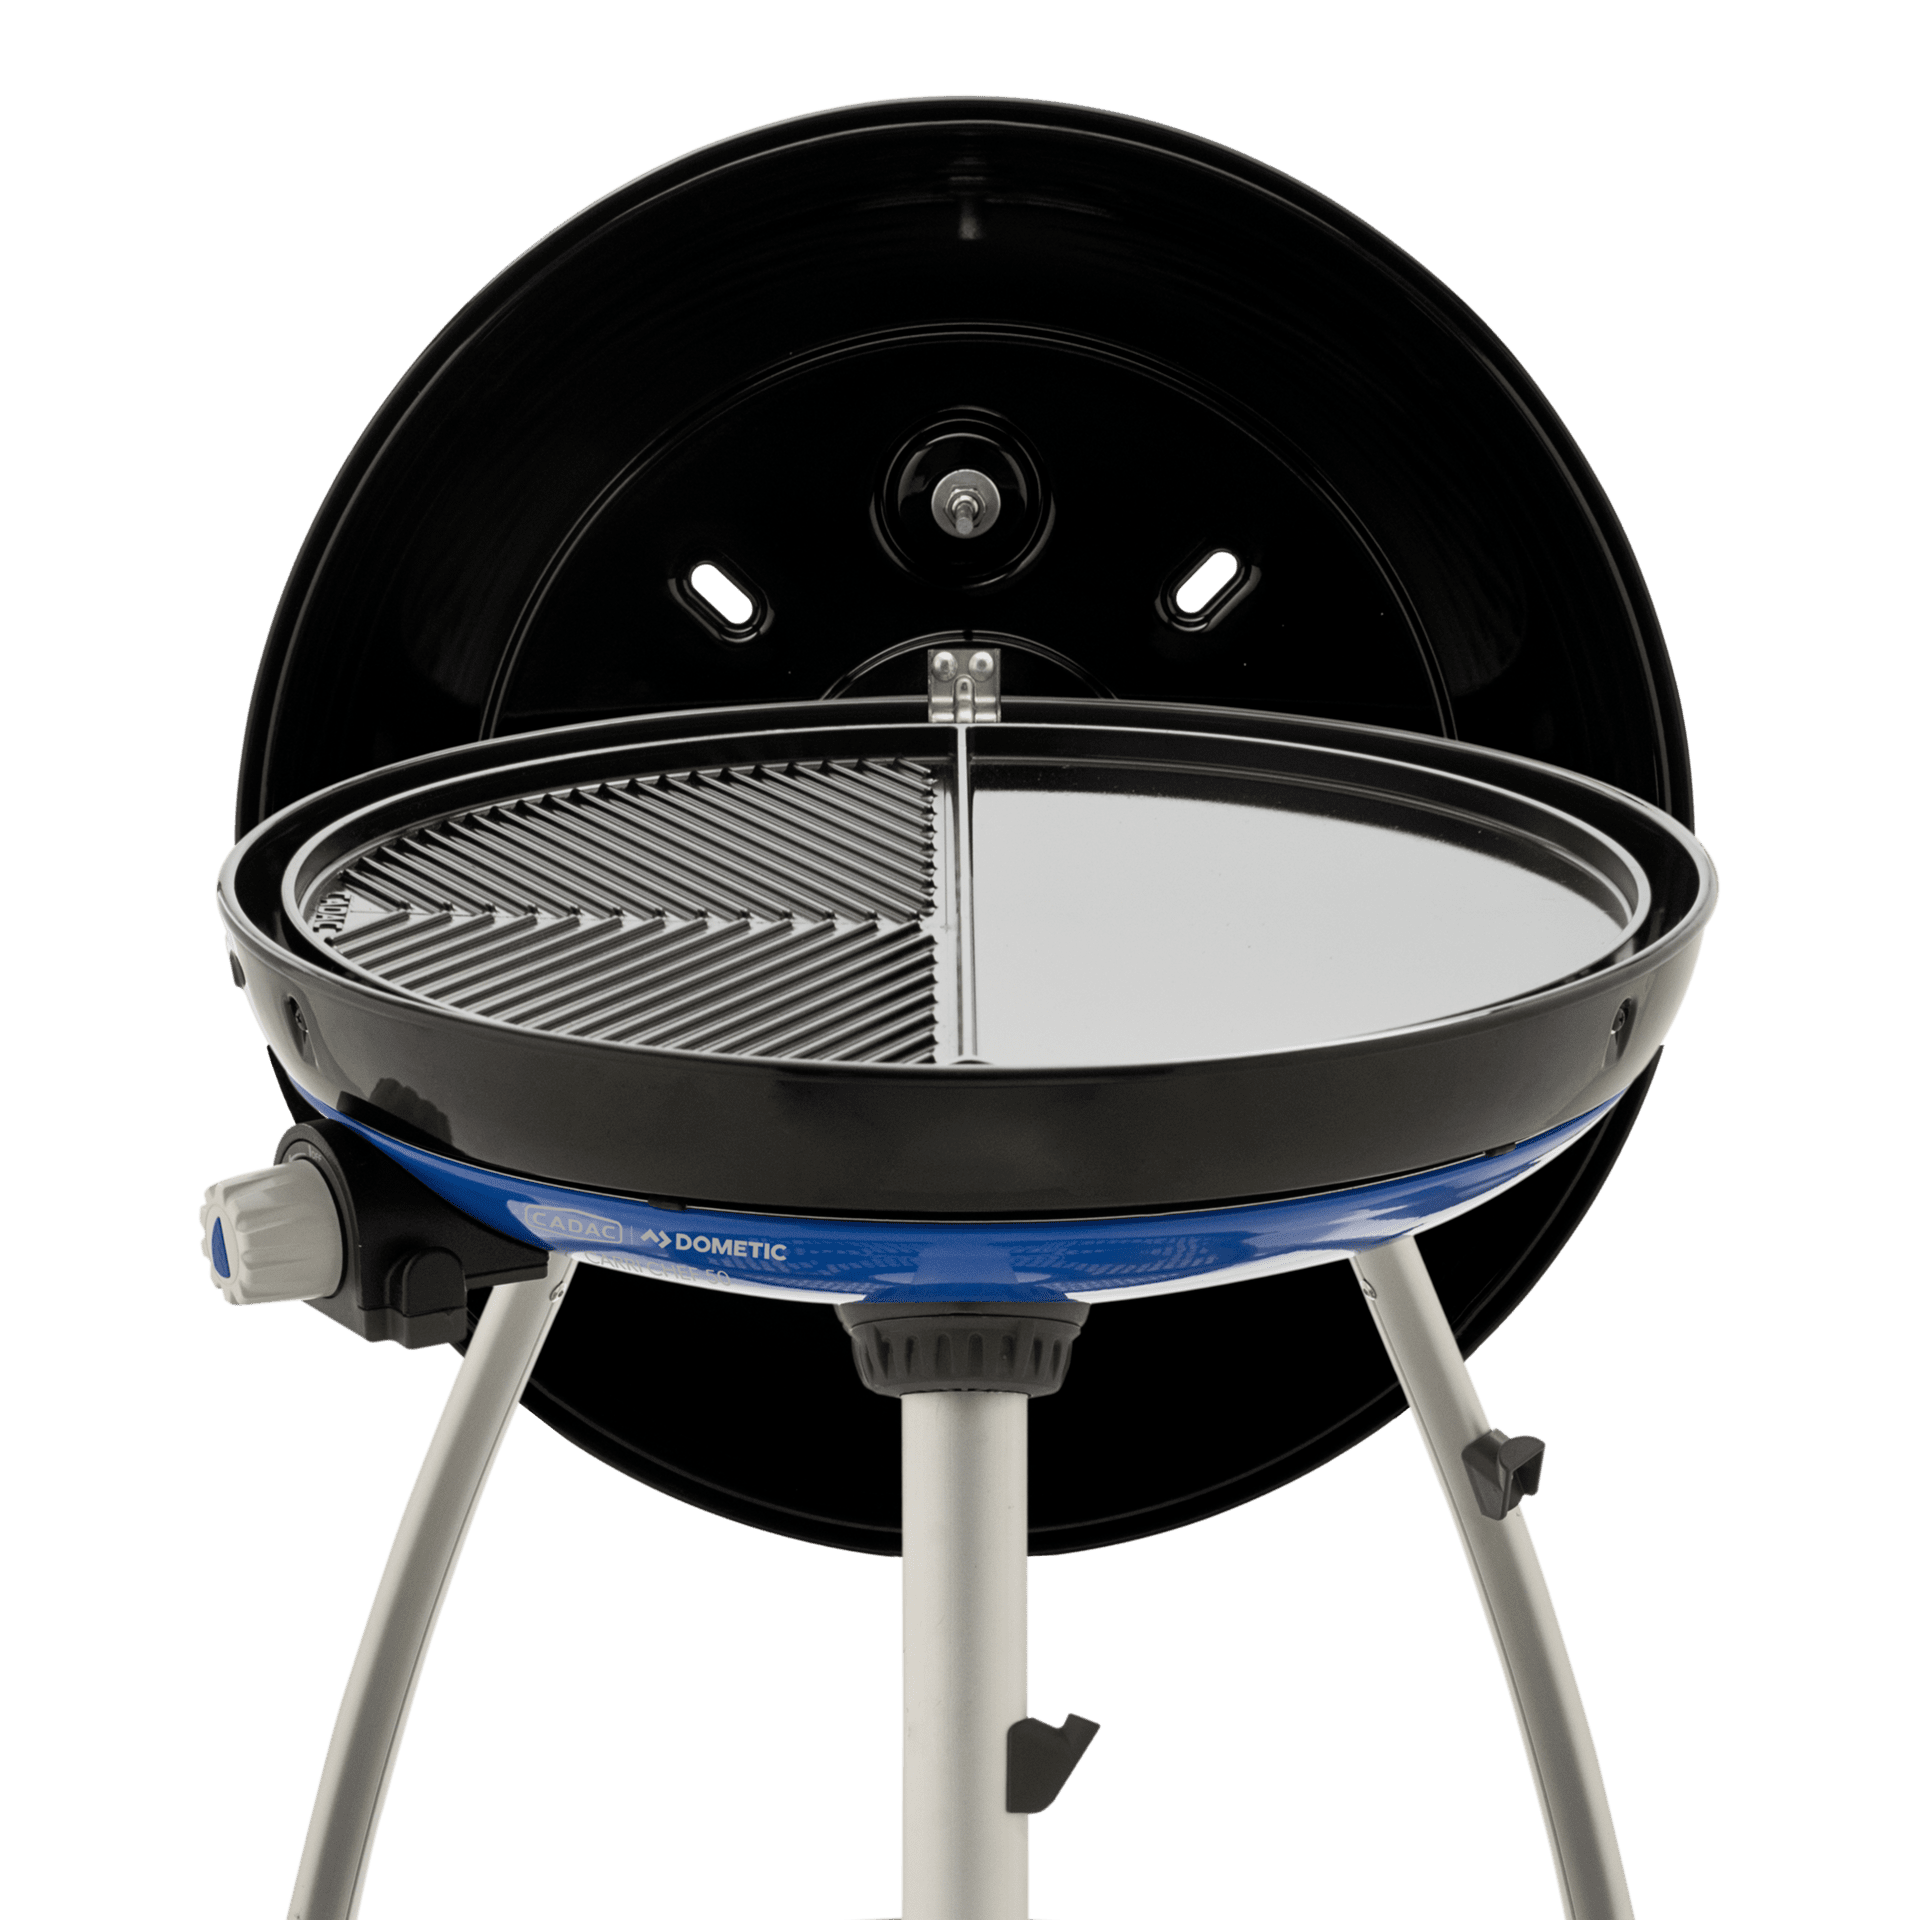 blanding Kilauea Mountain betaling Dometic Cadac Carri Chef 50 Combo - Outdoor gas BBQ and Gill2Braai, four  cooking surfaces, 50 cm, 30 mbar | Dometic.com